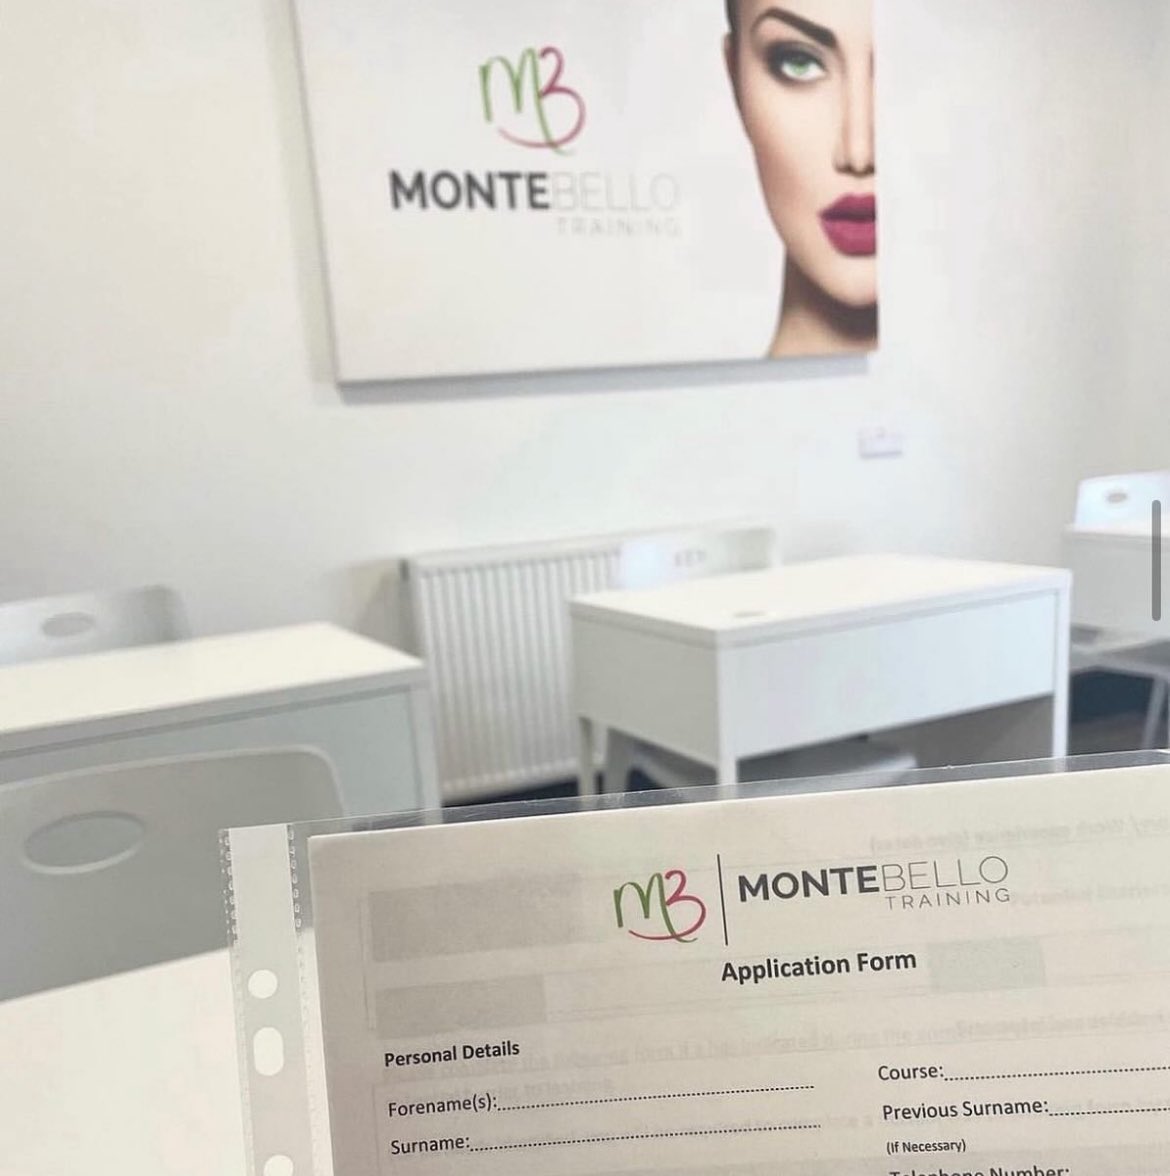 Ready for a full day of interviews.
Our next interview date is 𝟮𝟲𝗧𝗛 𝗝𝗨𝗡𝗘. Please call our training line on 0151-329-3292, opt 1 to book your slot. #Hairdressing #Apprenticeship